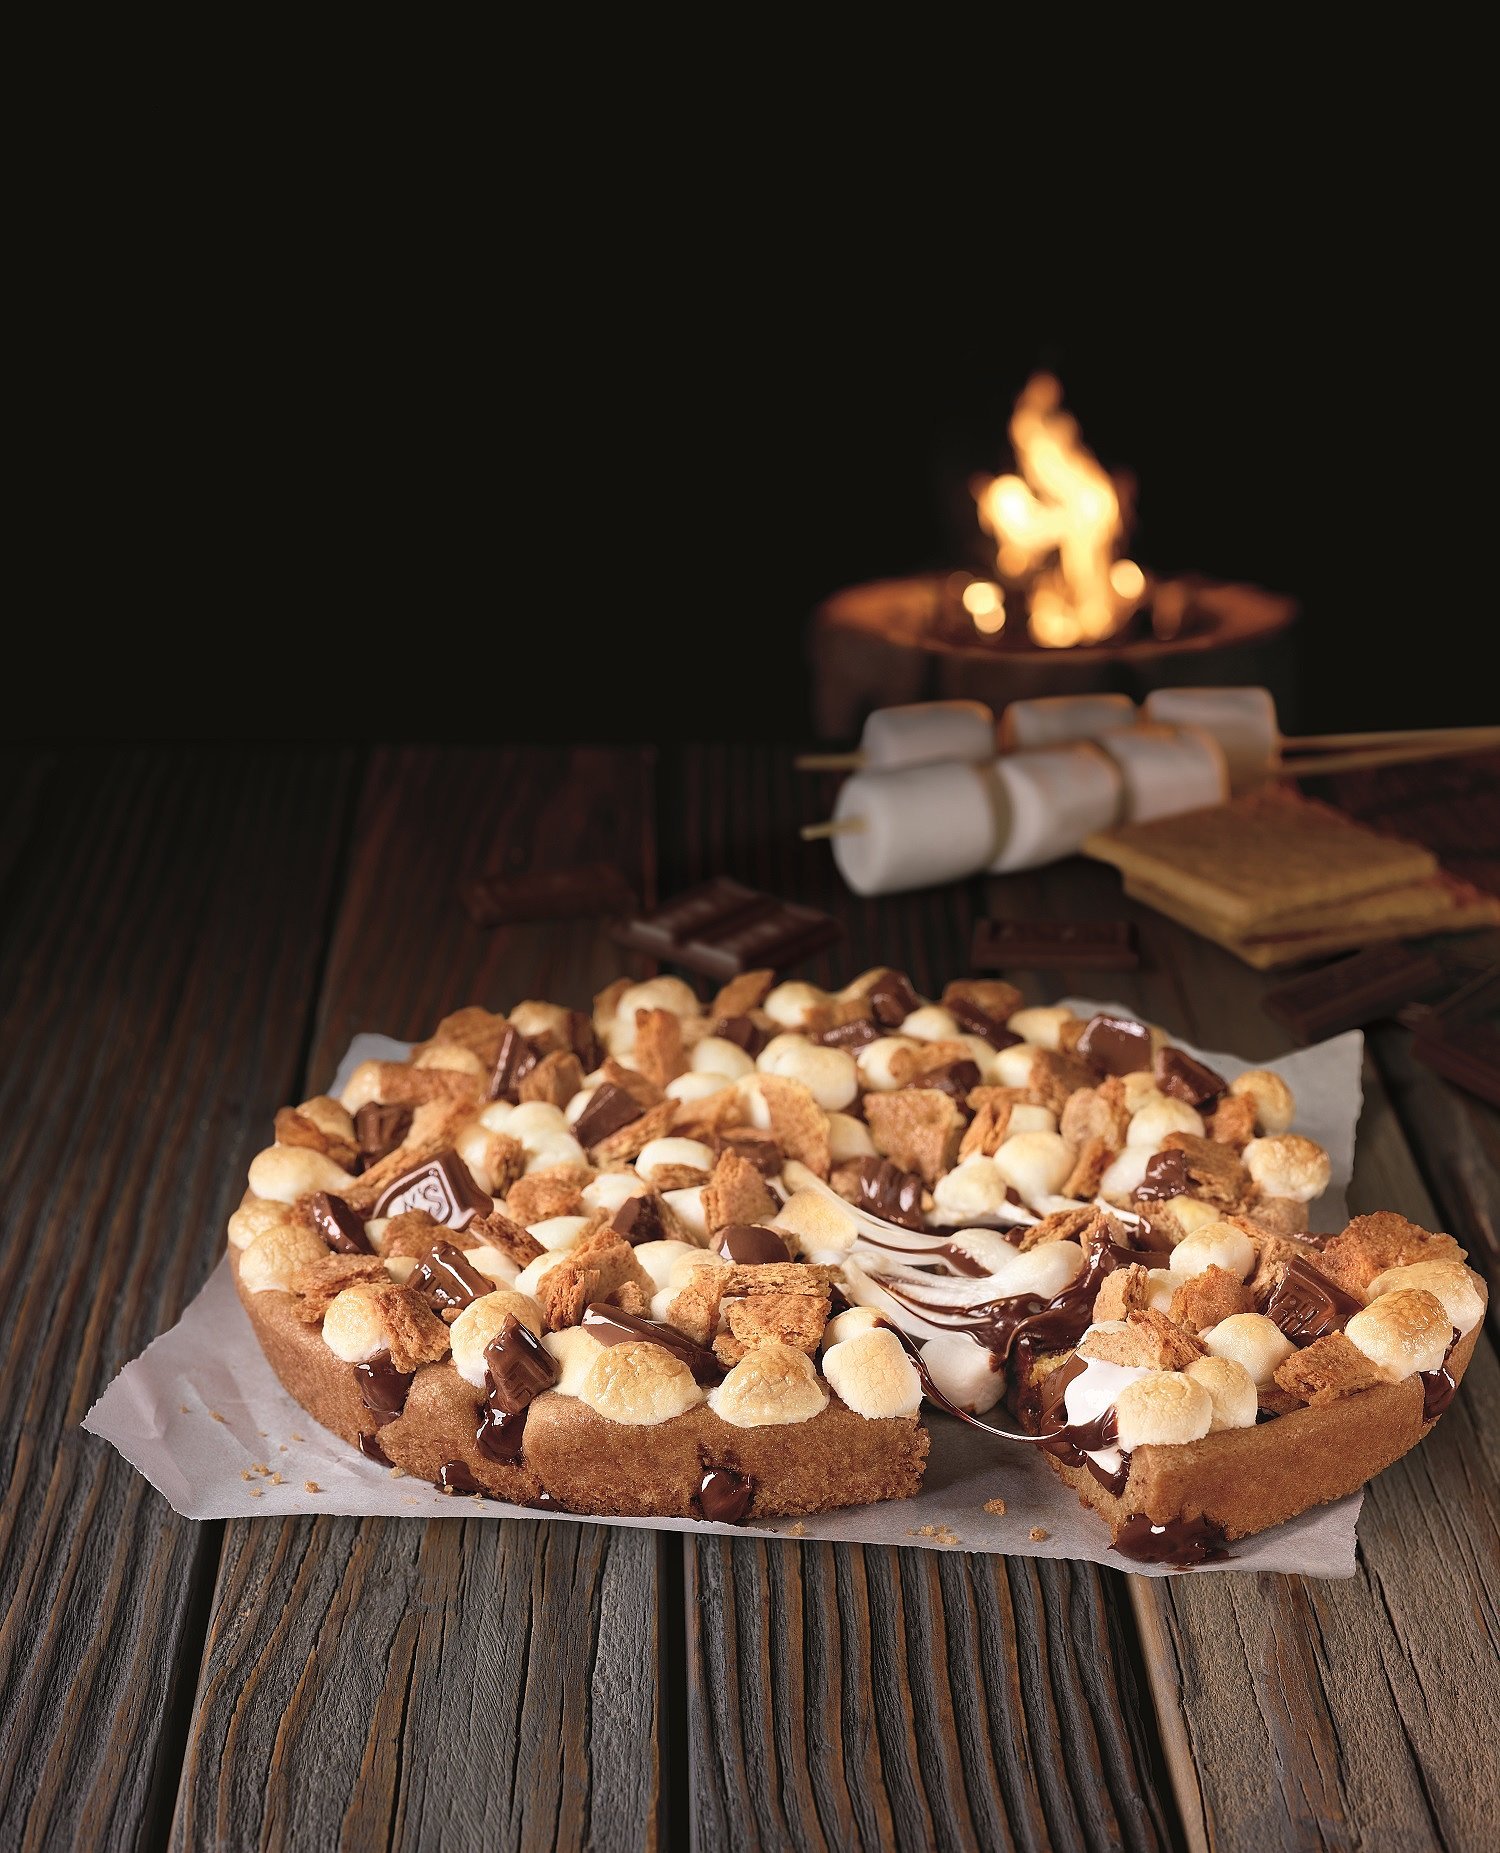 Pizza Hut Just Added the Most Amazing S'mores Dessert to Its Menu